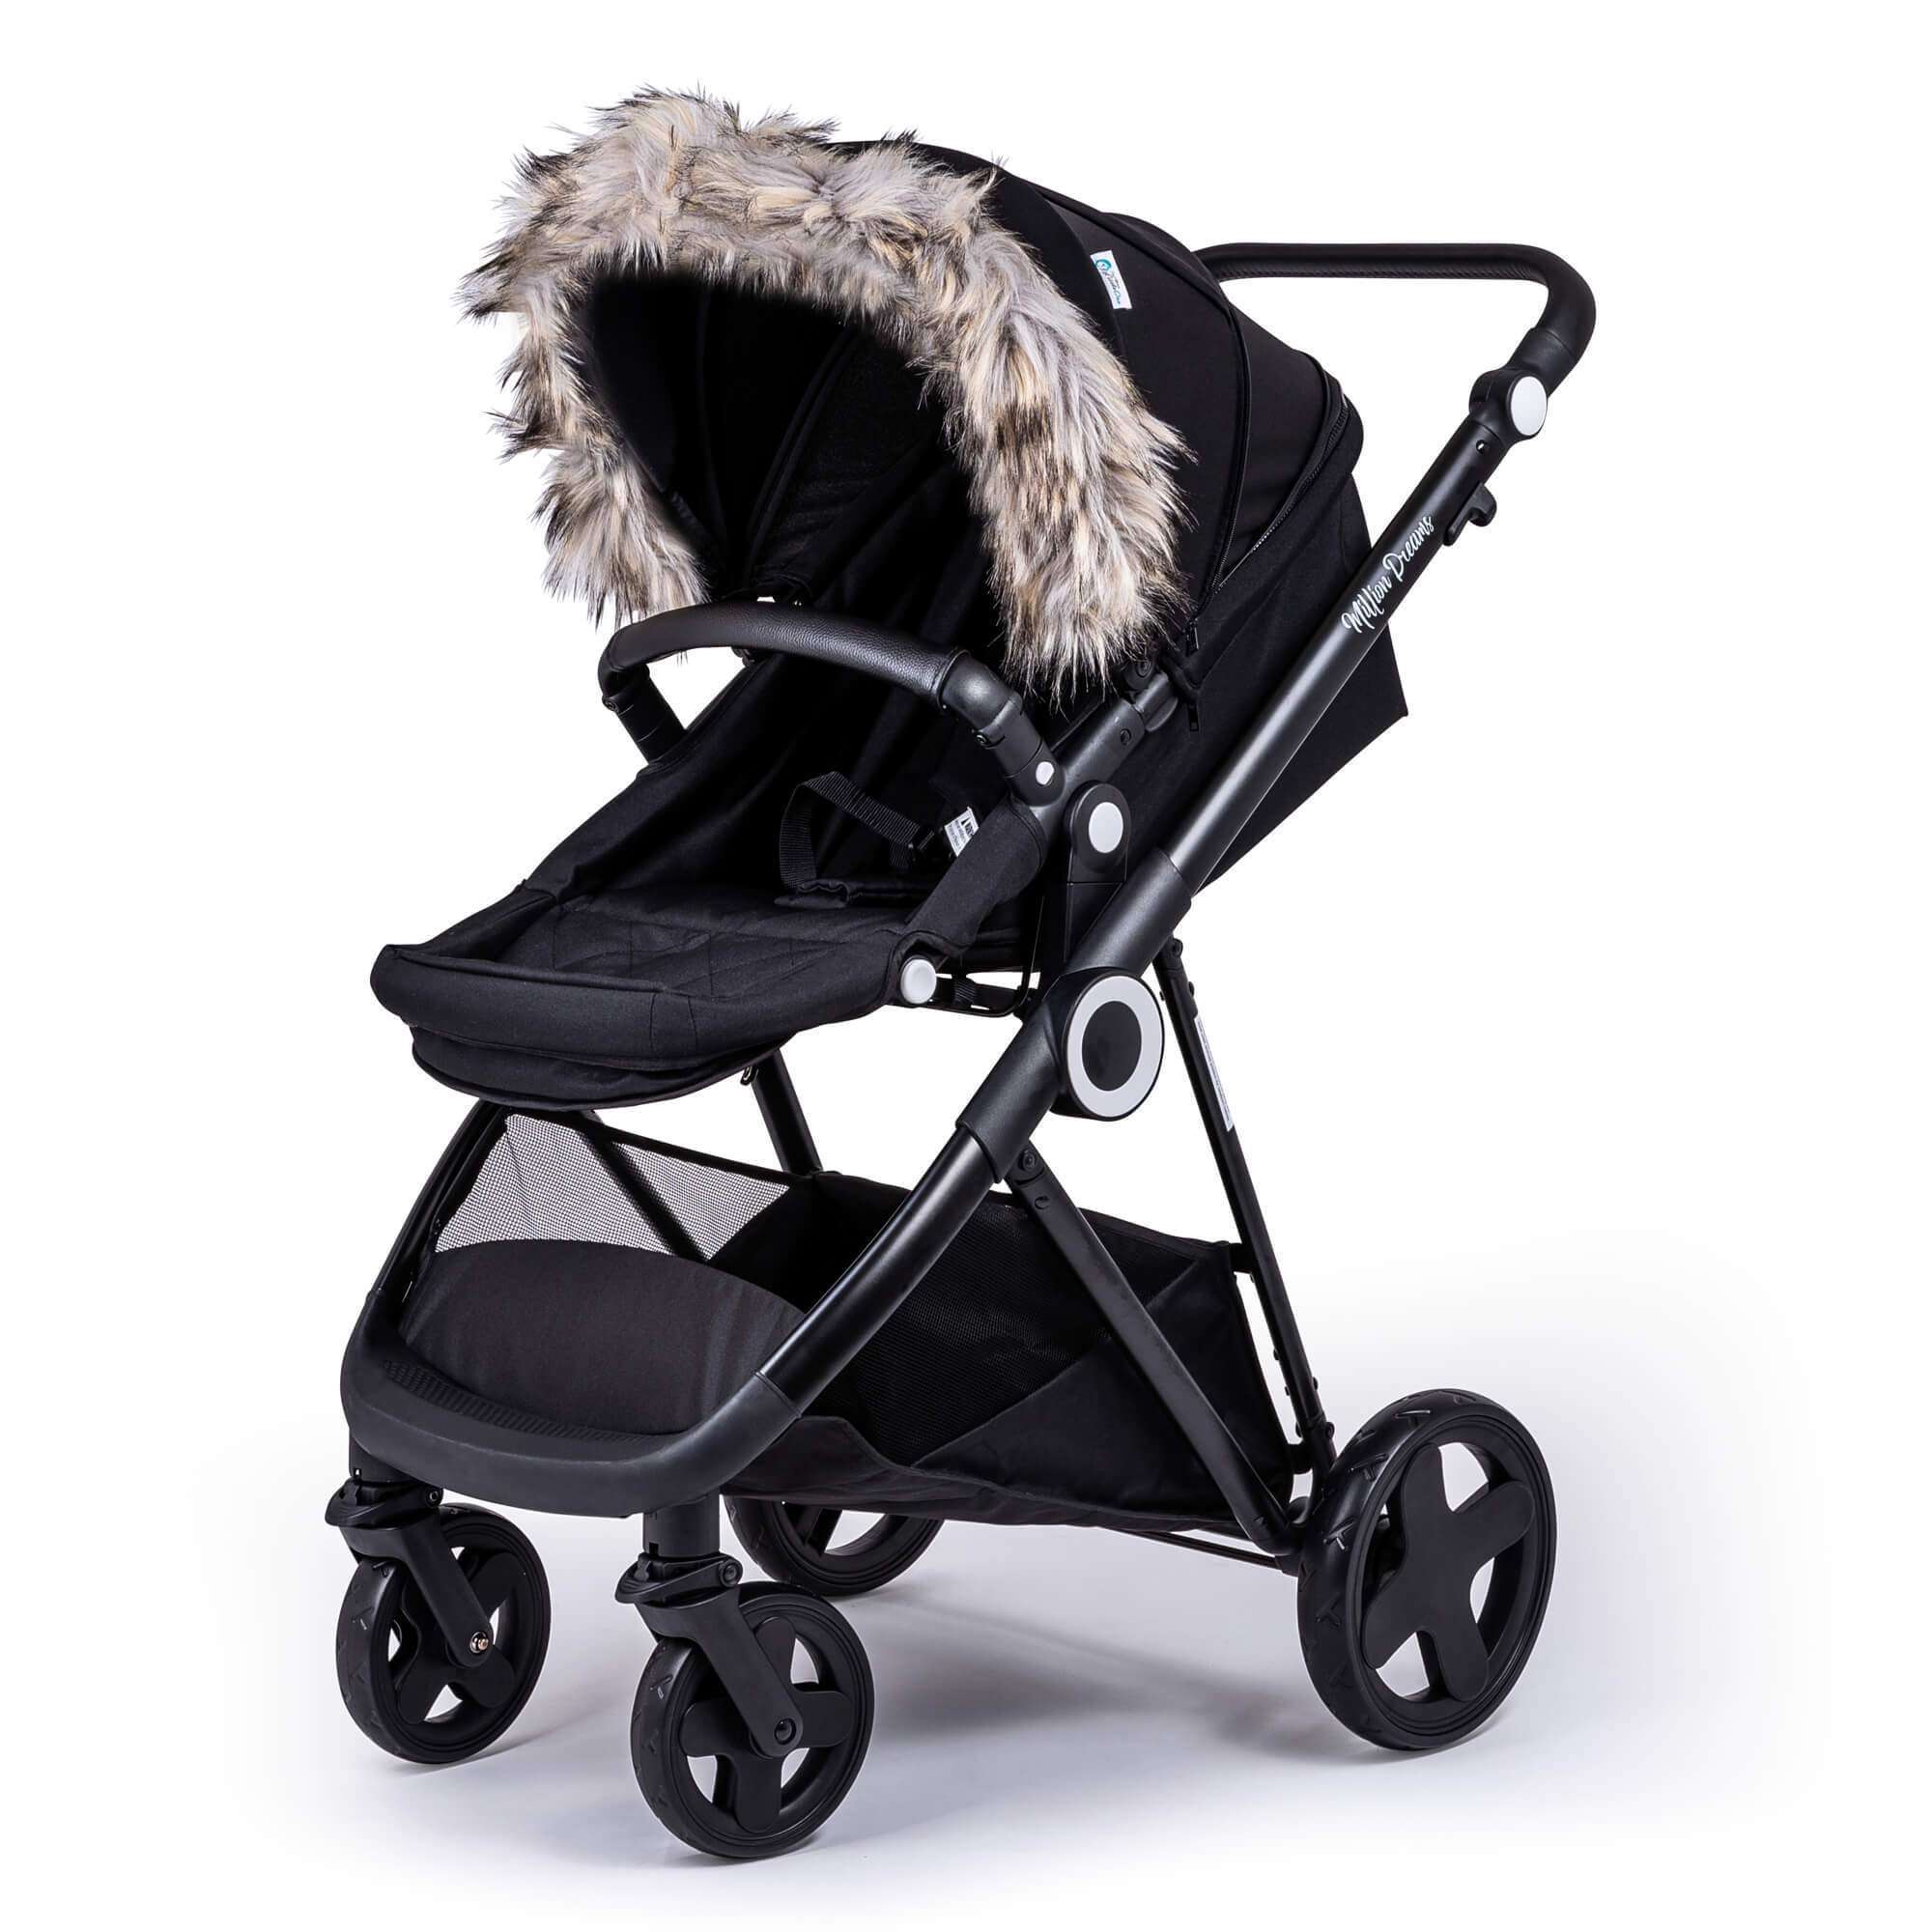 Pram Fur Hood Trim Attachment for Pushchair Compatible with Hesba - Light Grey / Fits All Models | For Your Little One